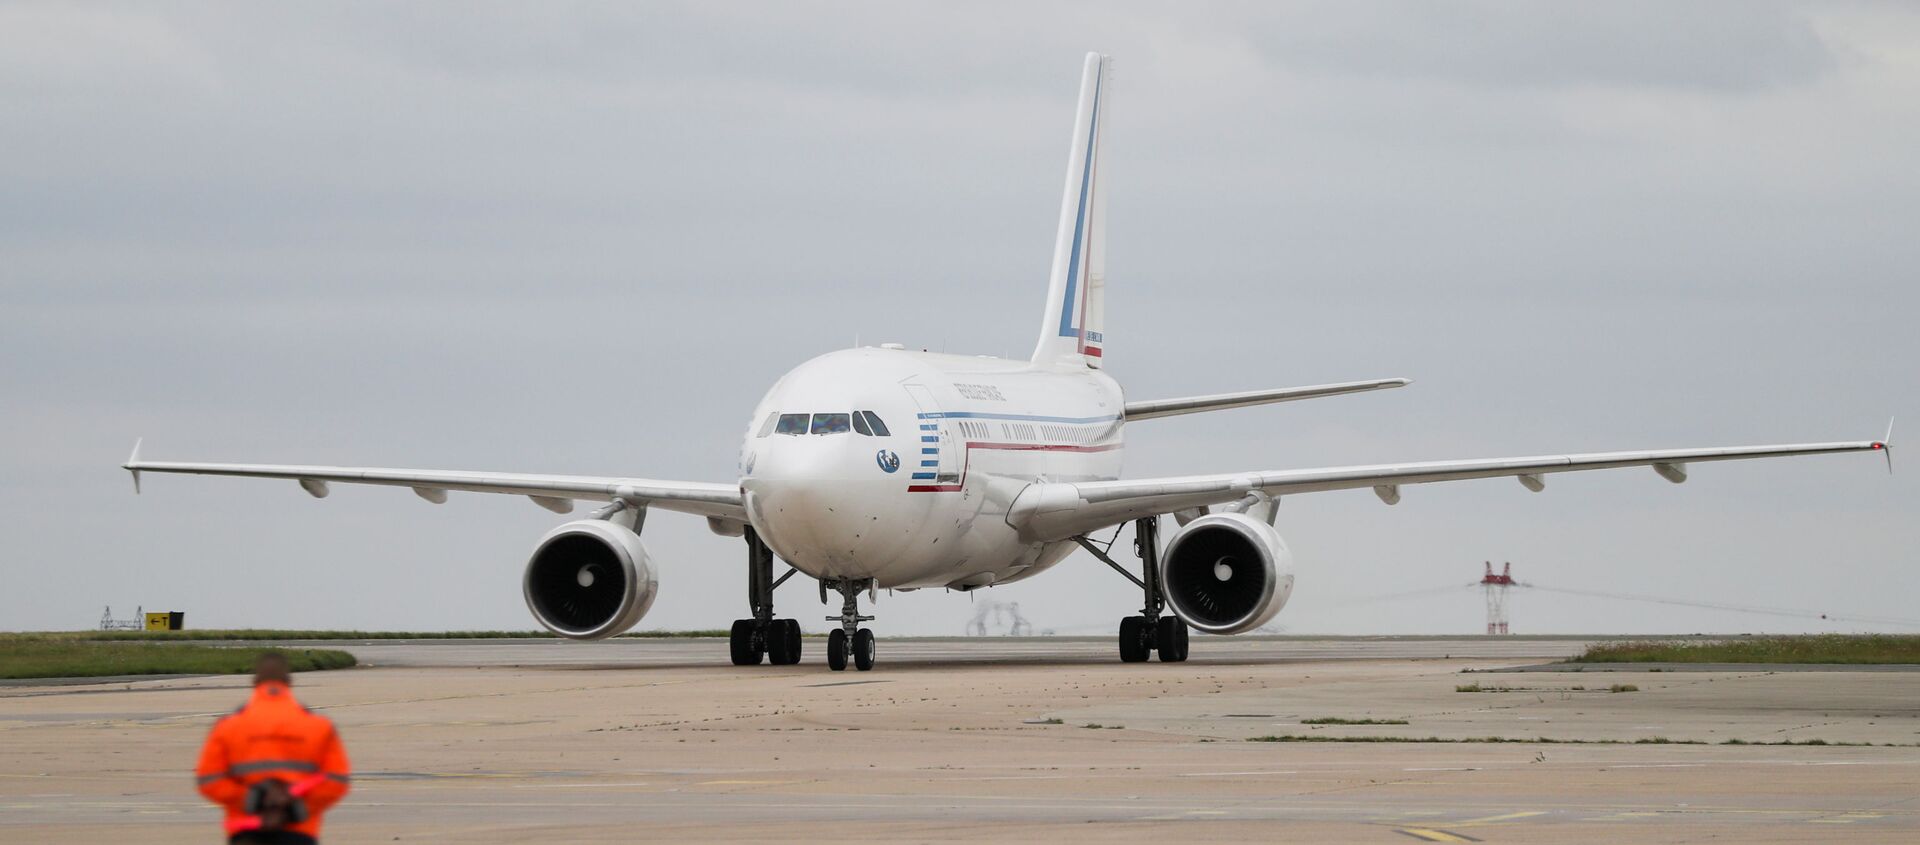 A plane carrying people who have been evacuated from Afghanistan taxis on the tarmac at Roissy Charles-de-Gaulle airport after Taliban insurgents entered Afghanistan's capital Kabul, in Paris, France, August 17, 2021. - Sputnik International, 1920